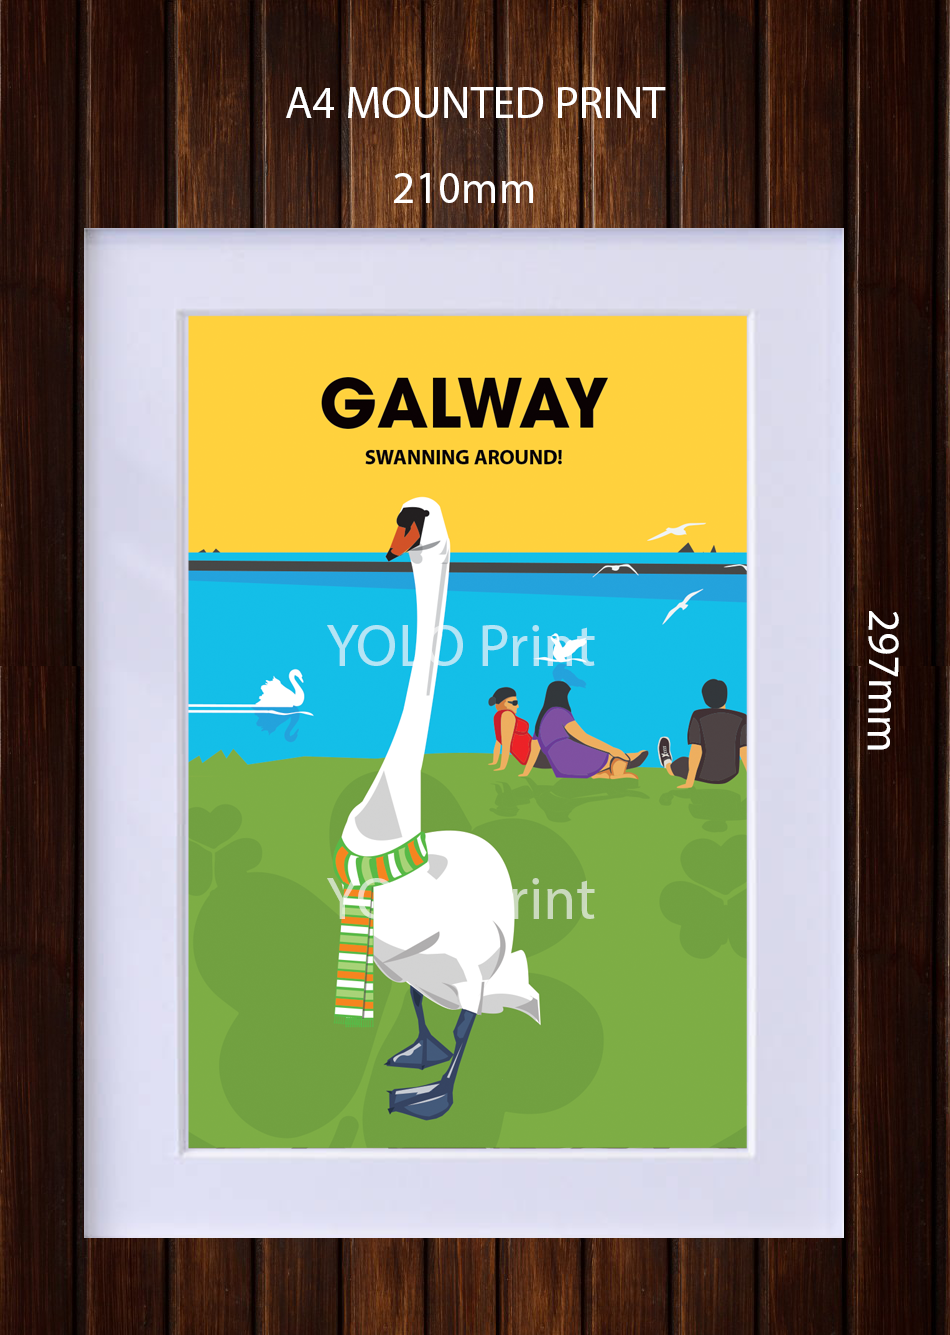 Galway Postcard or A4 Mounted Print  - Swanning Around